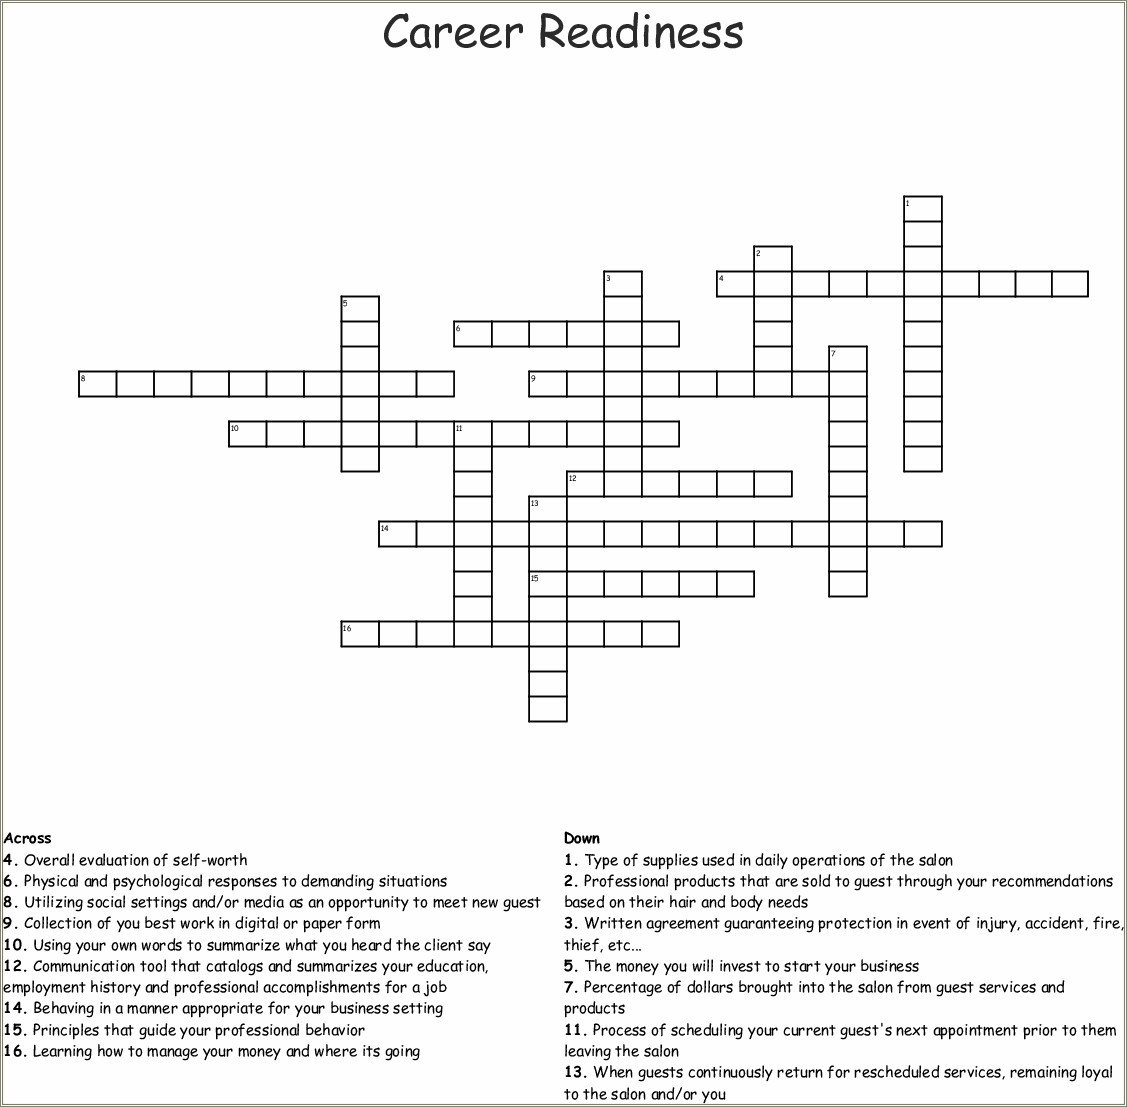 Employment And Career Readiness Job Resume Crossword Puzzle